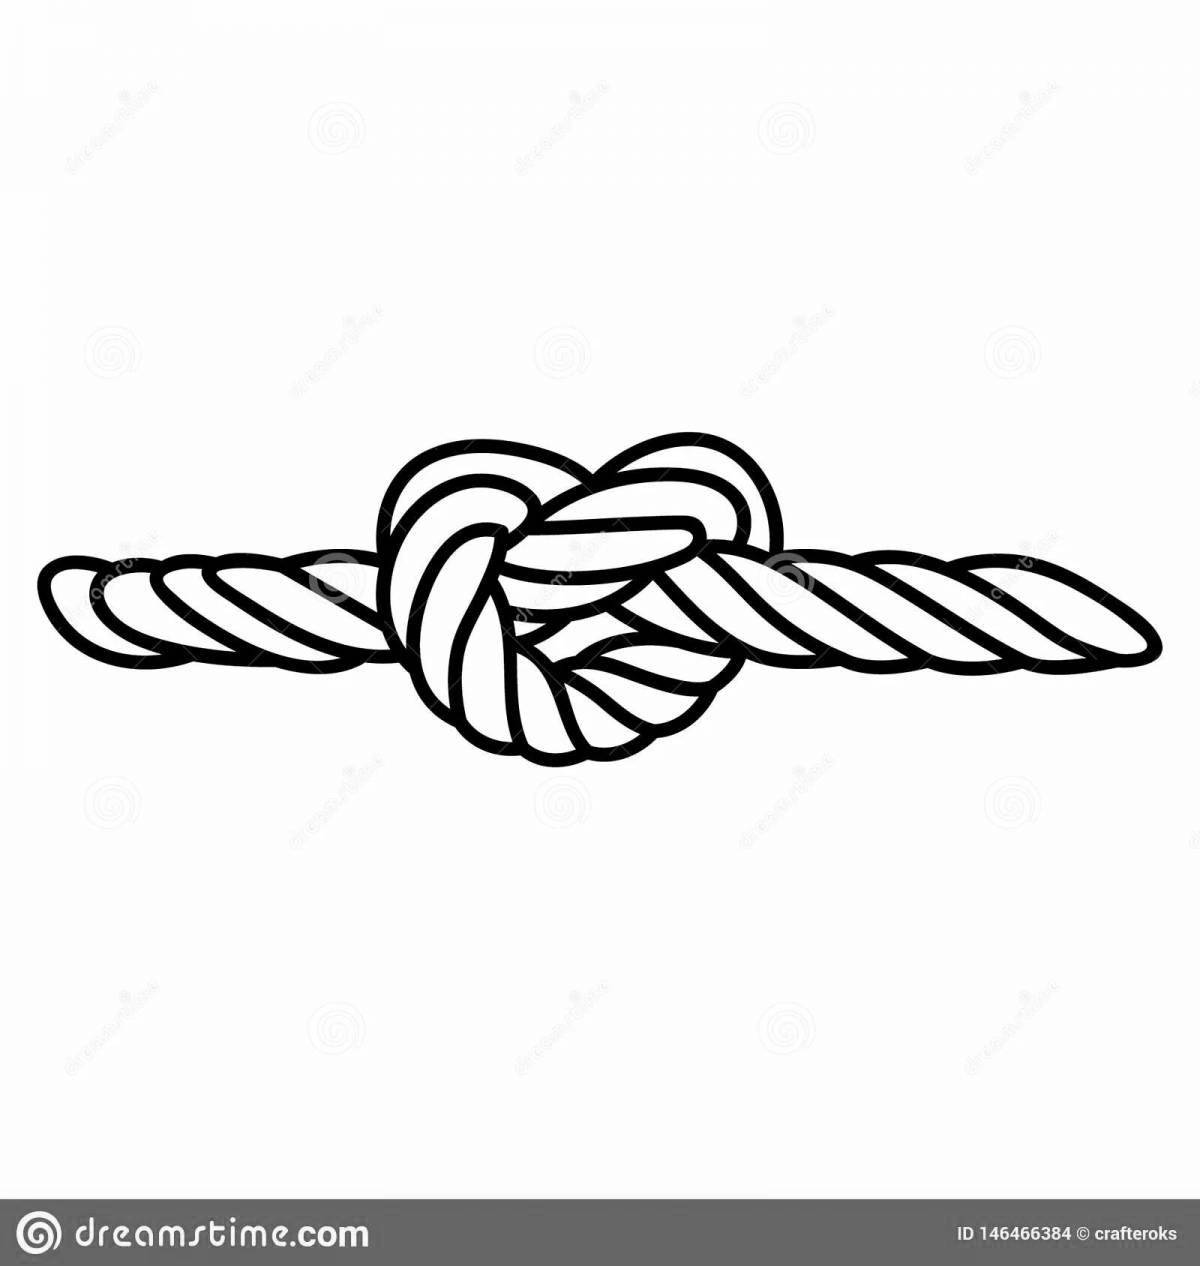 Color-frenzy rope coloring page